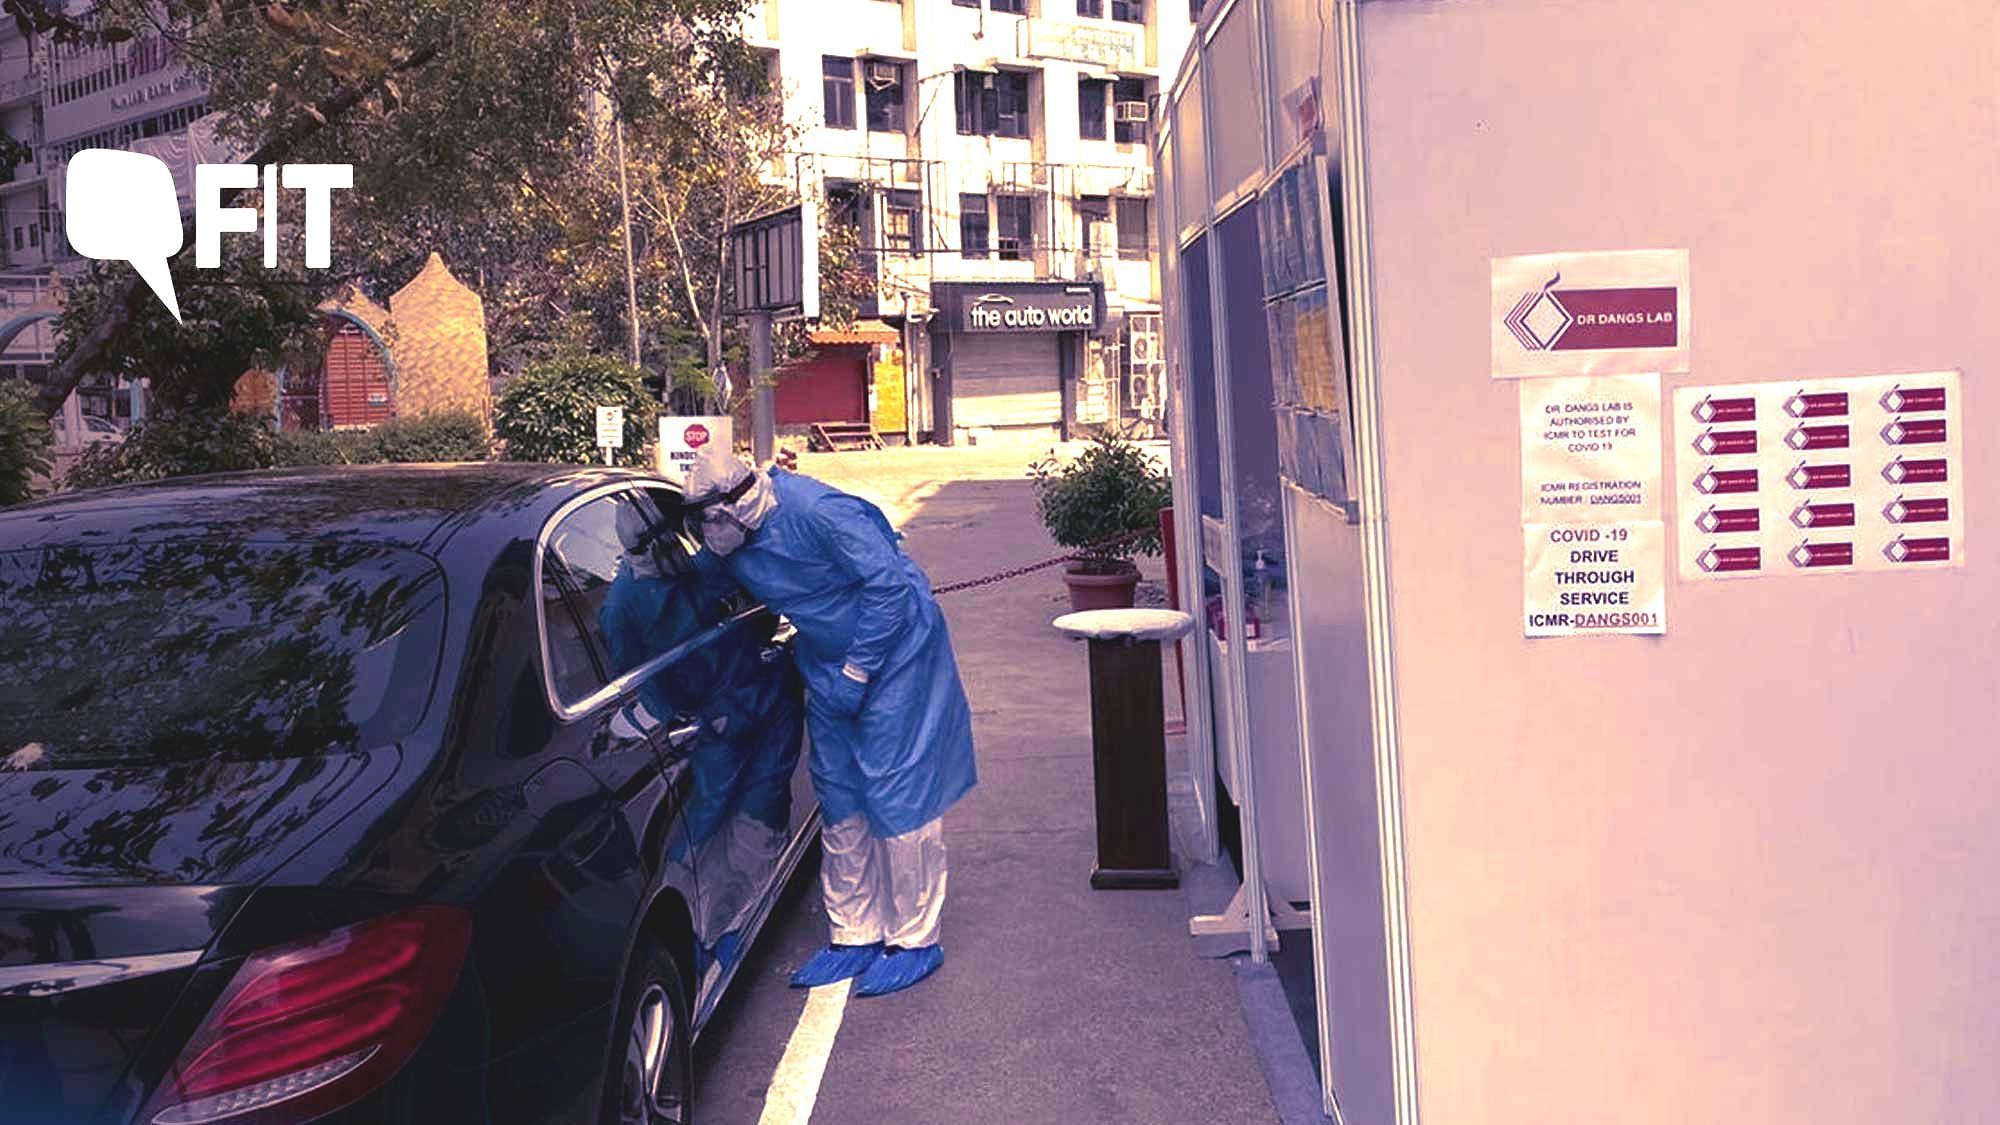 Dr Dangs Lab is offering the country’s first drive-through sample collection service in Delhi.